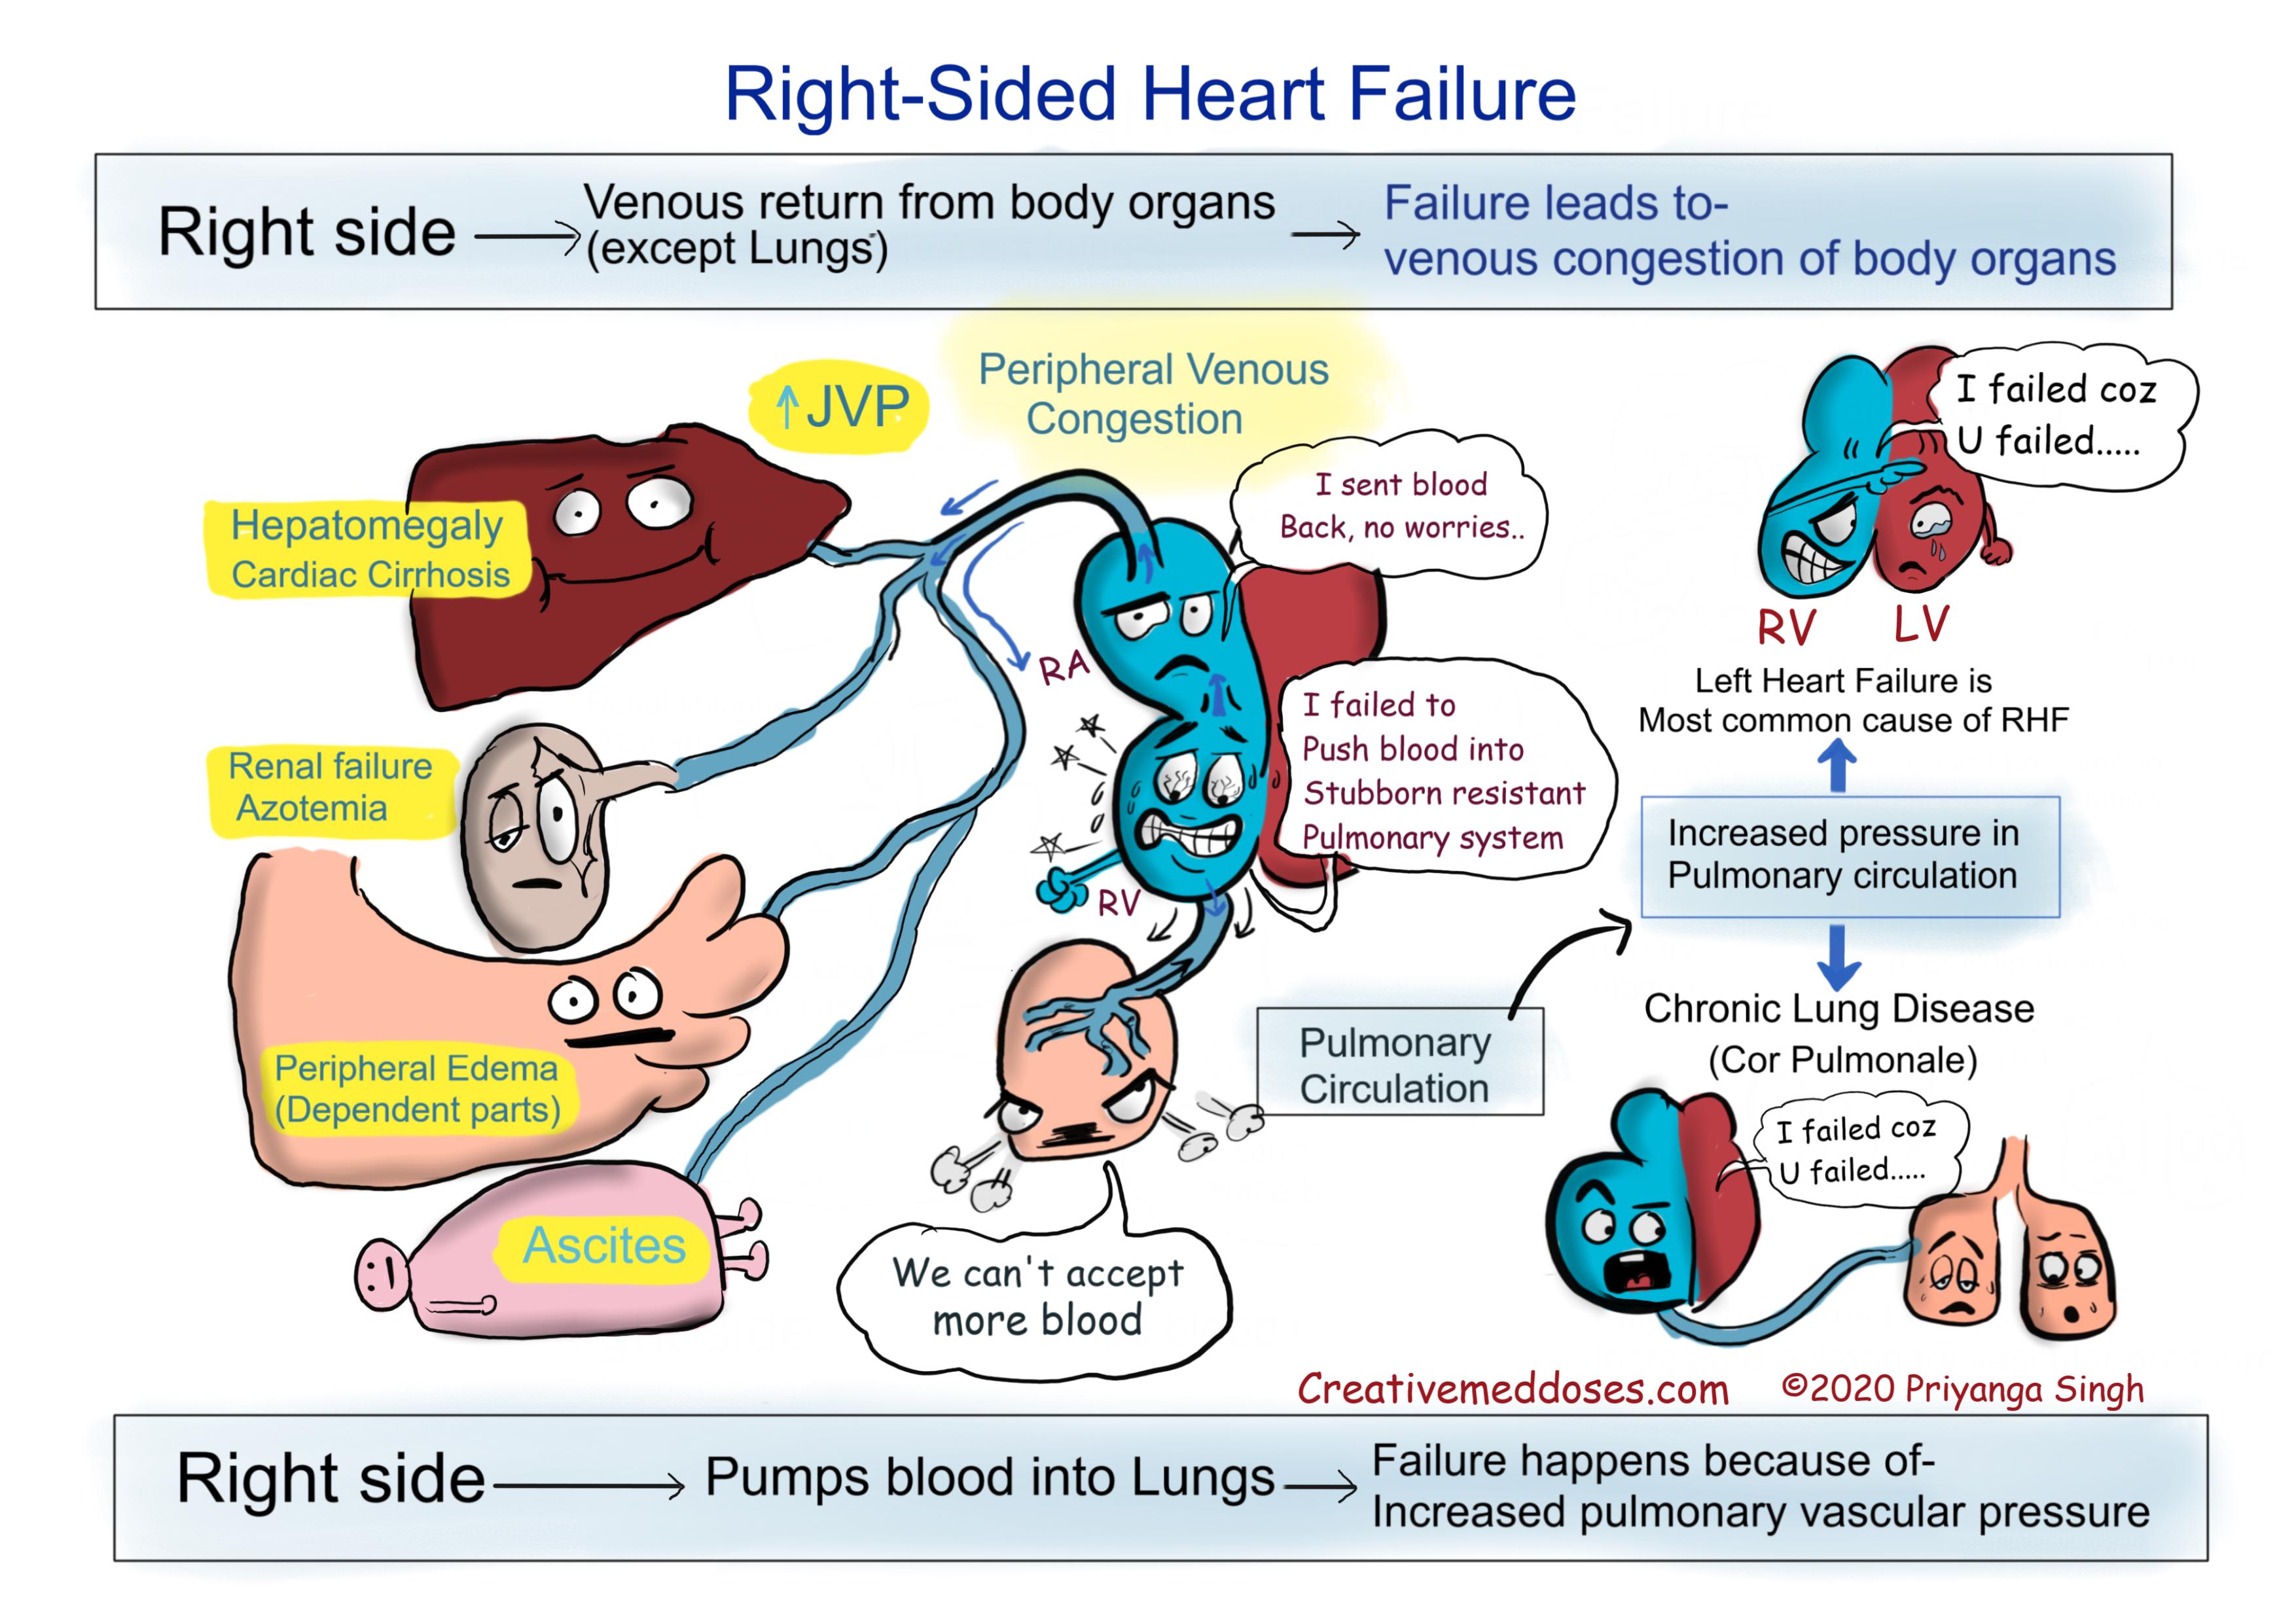 heart-failure-left-sided-vs-right-sided-creative-med-doses